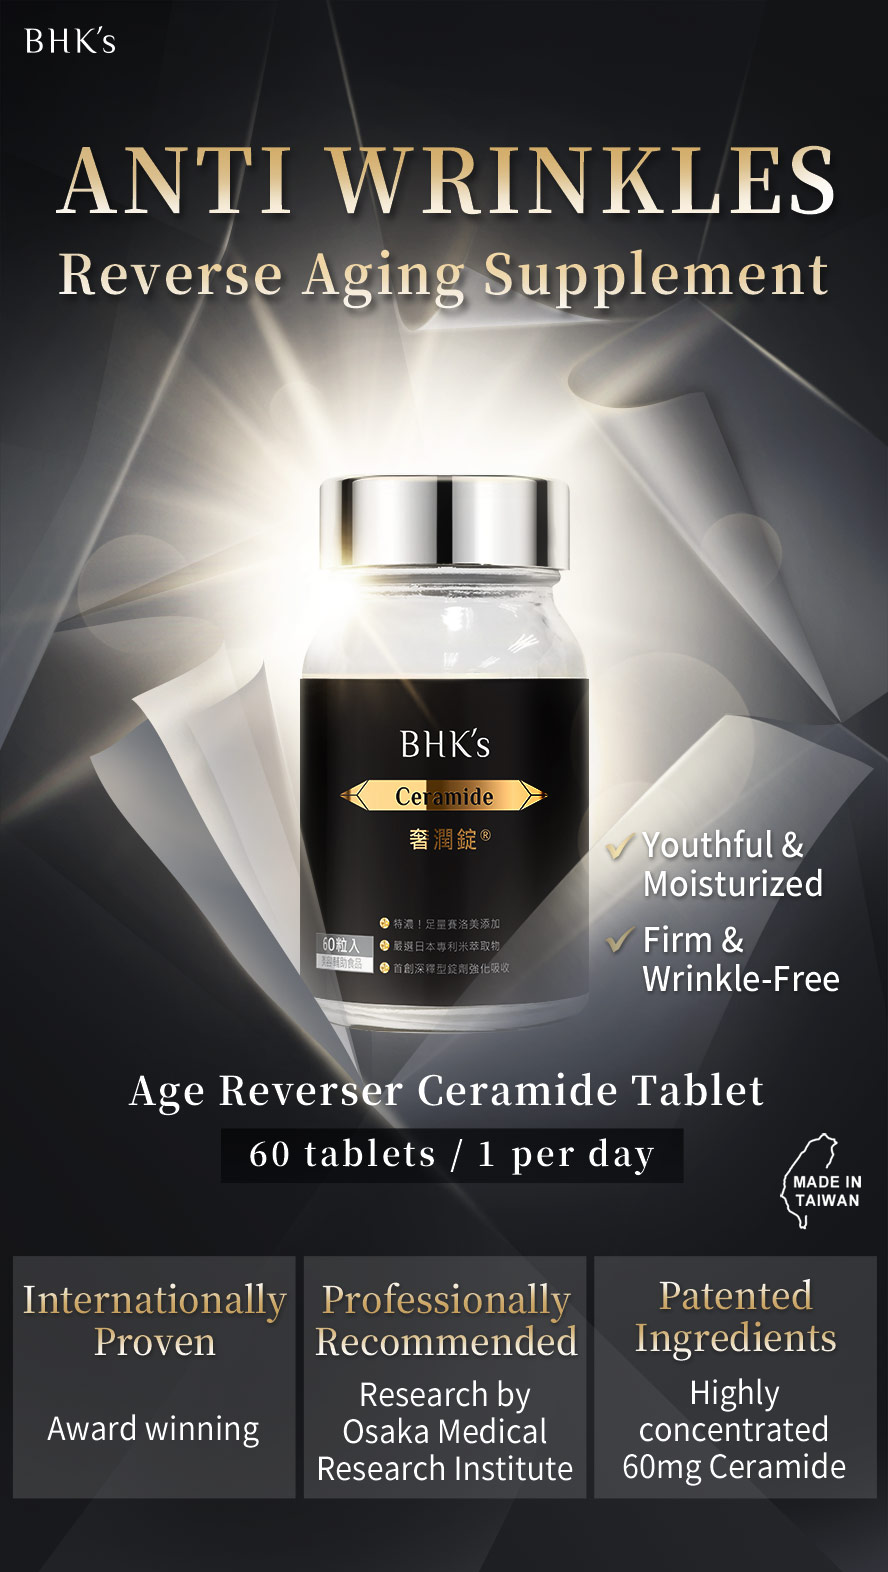 BHK's Ceramide giving you plumper, smoother, firmer-feeling skin with fewer visible lines and wrinkles